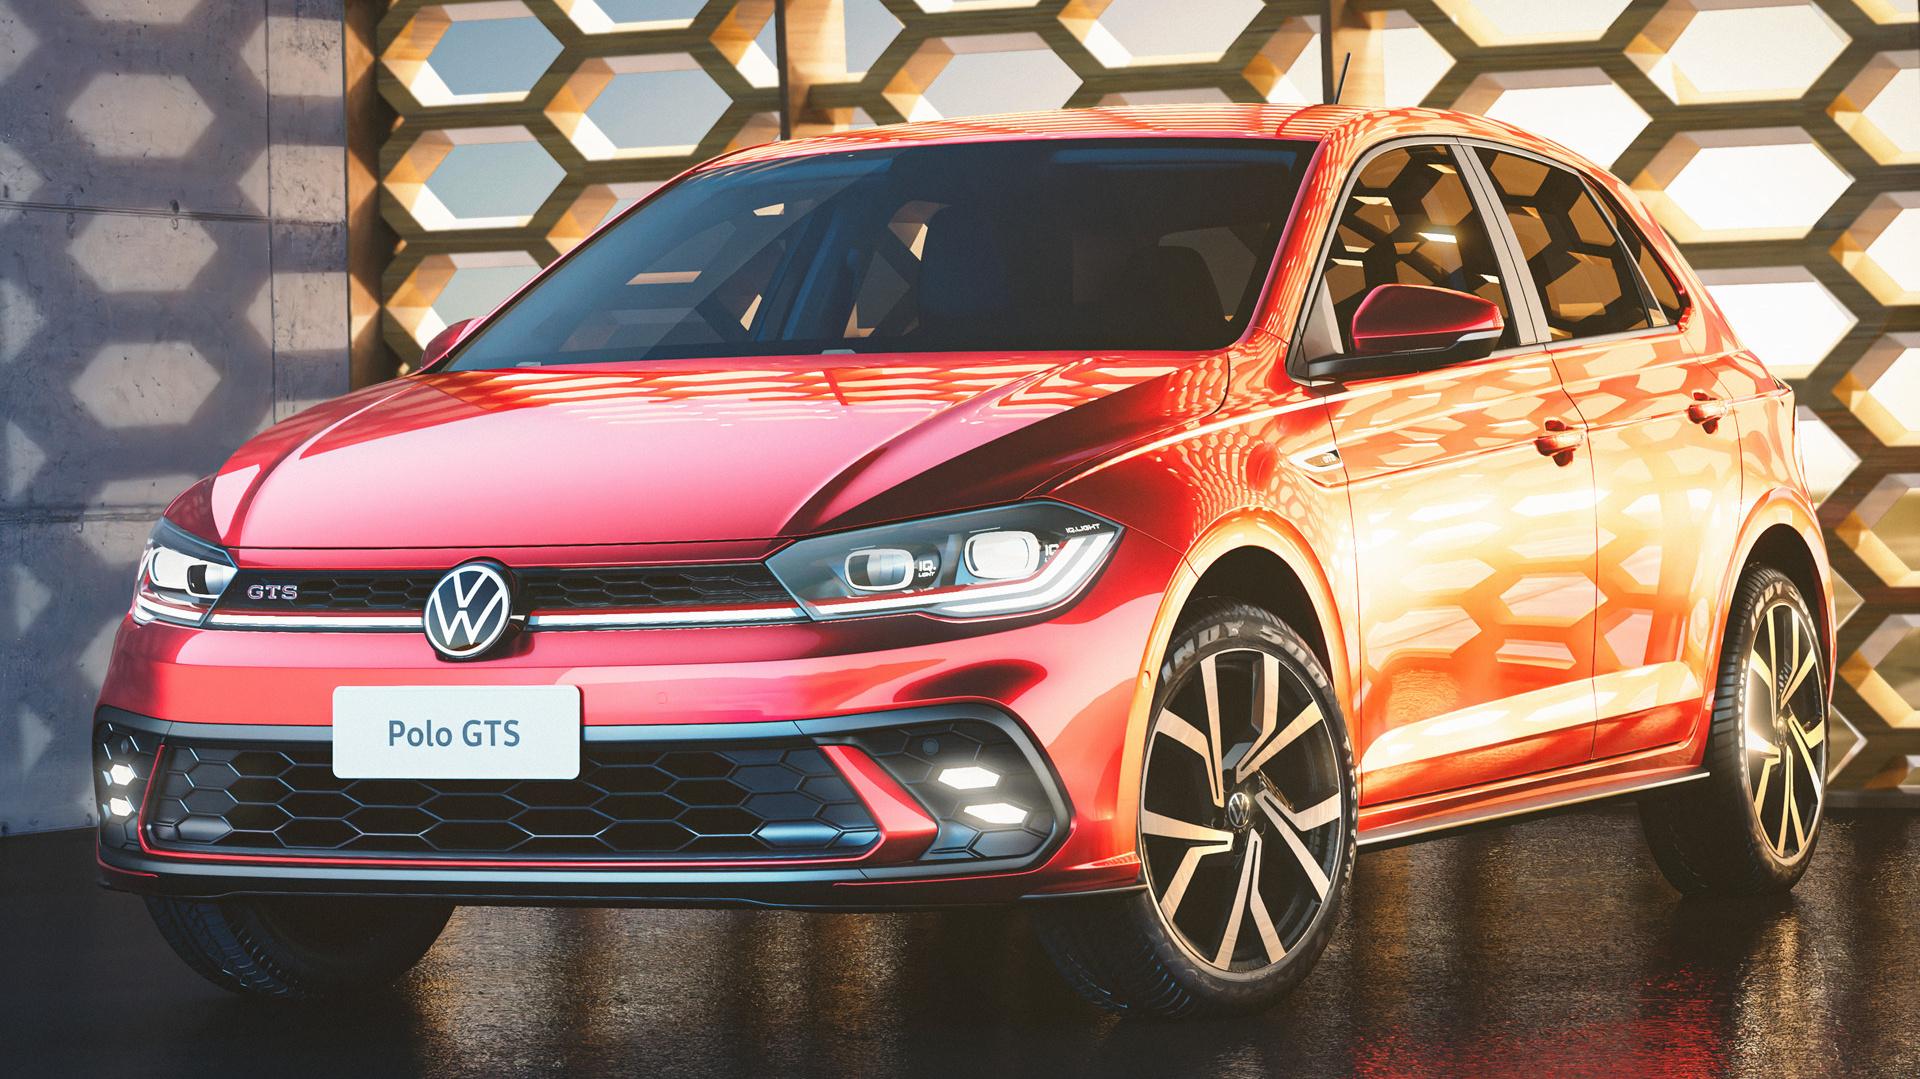 Volkswagen Polo Gts Br Wallpaper And HD Image Car Pixel